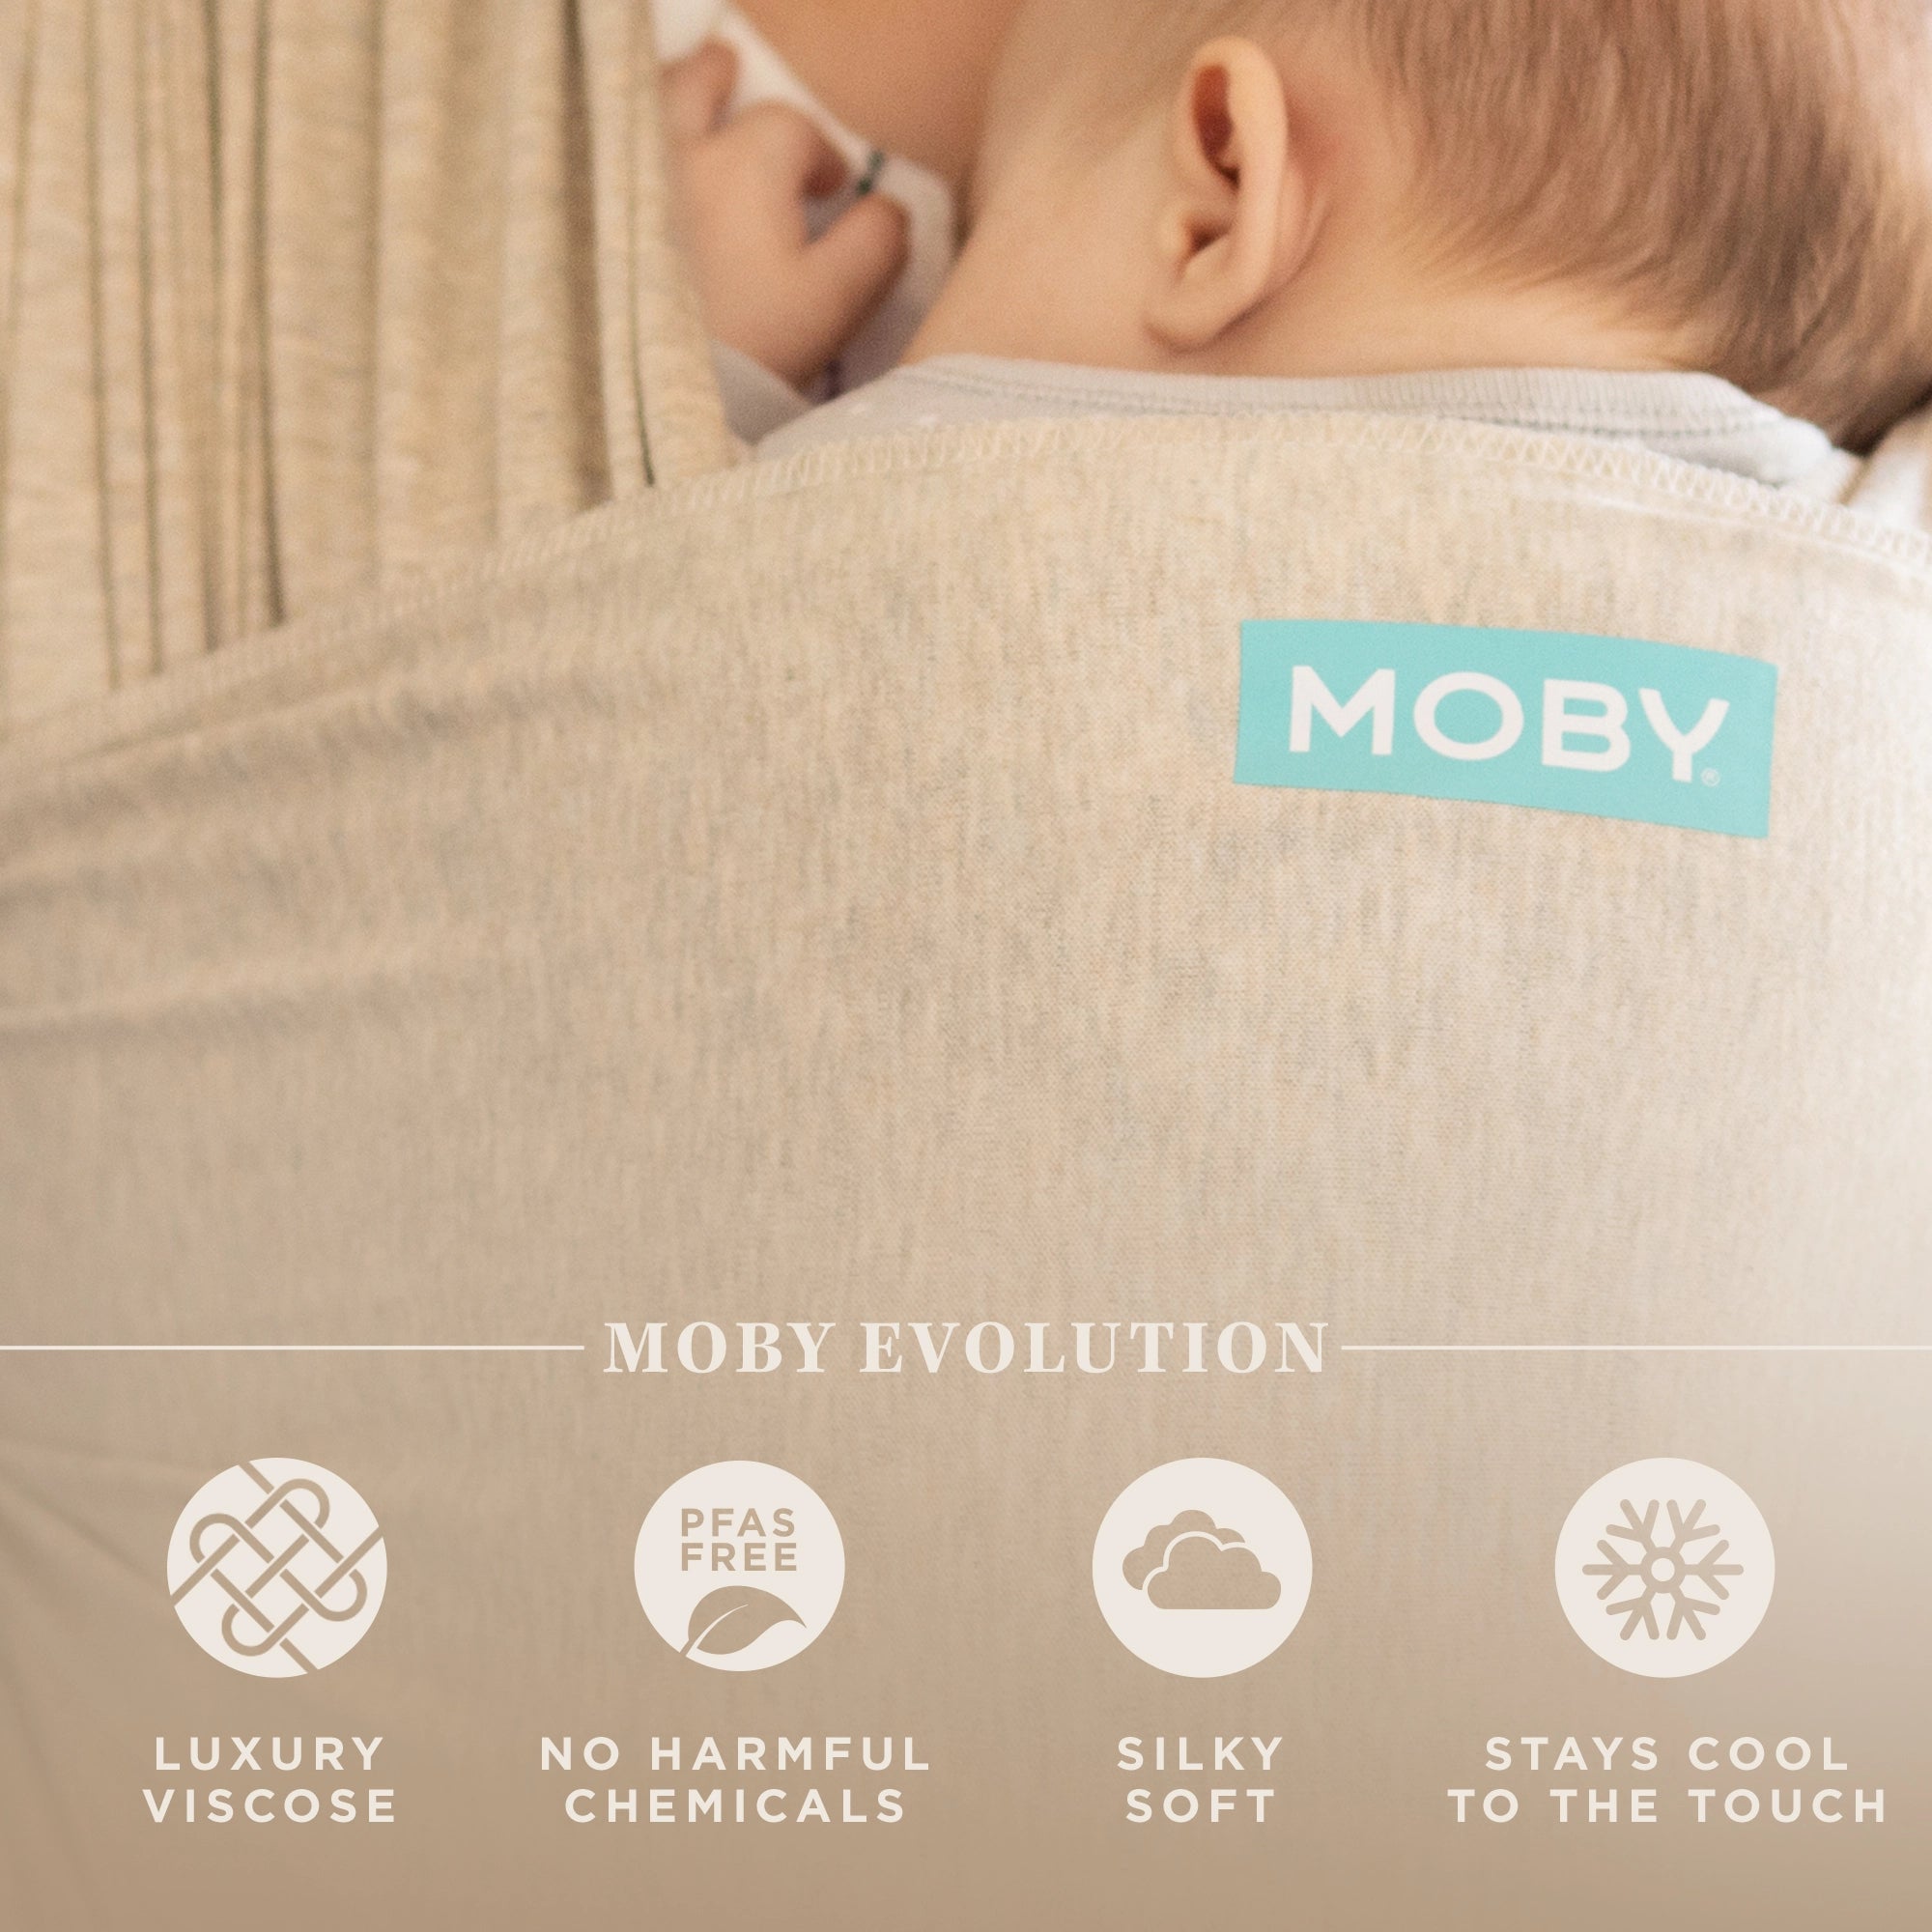 moby evolution features luxury viscose, no harmful chemicals, pfas free, silky soft, stays cool to the touch